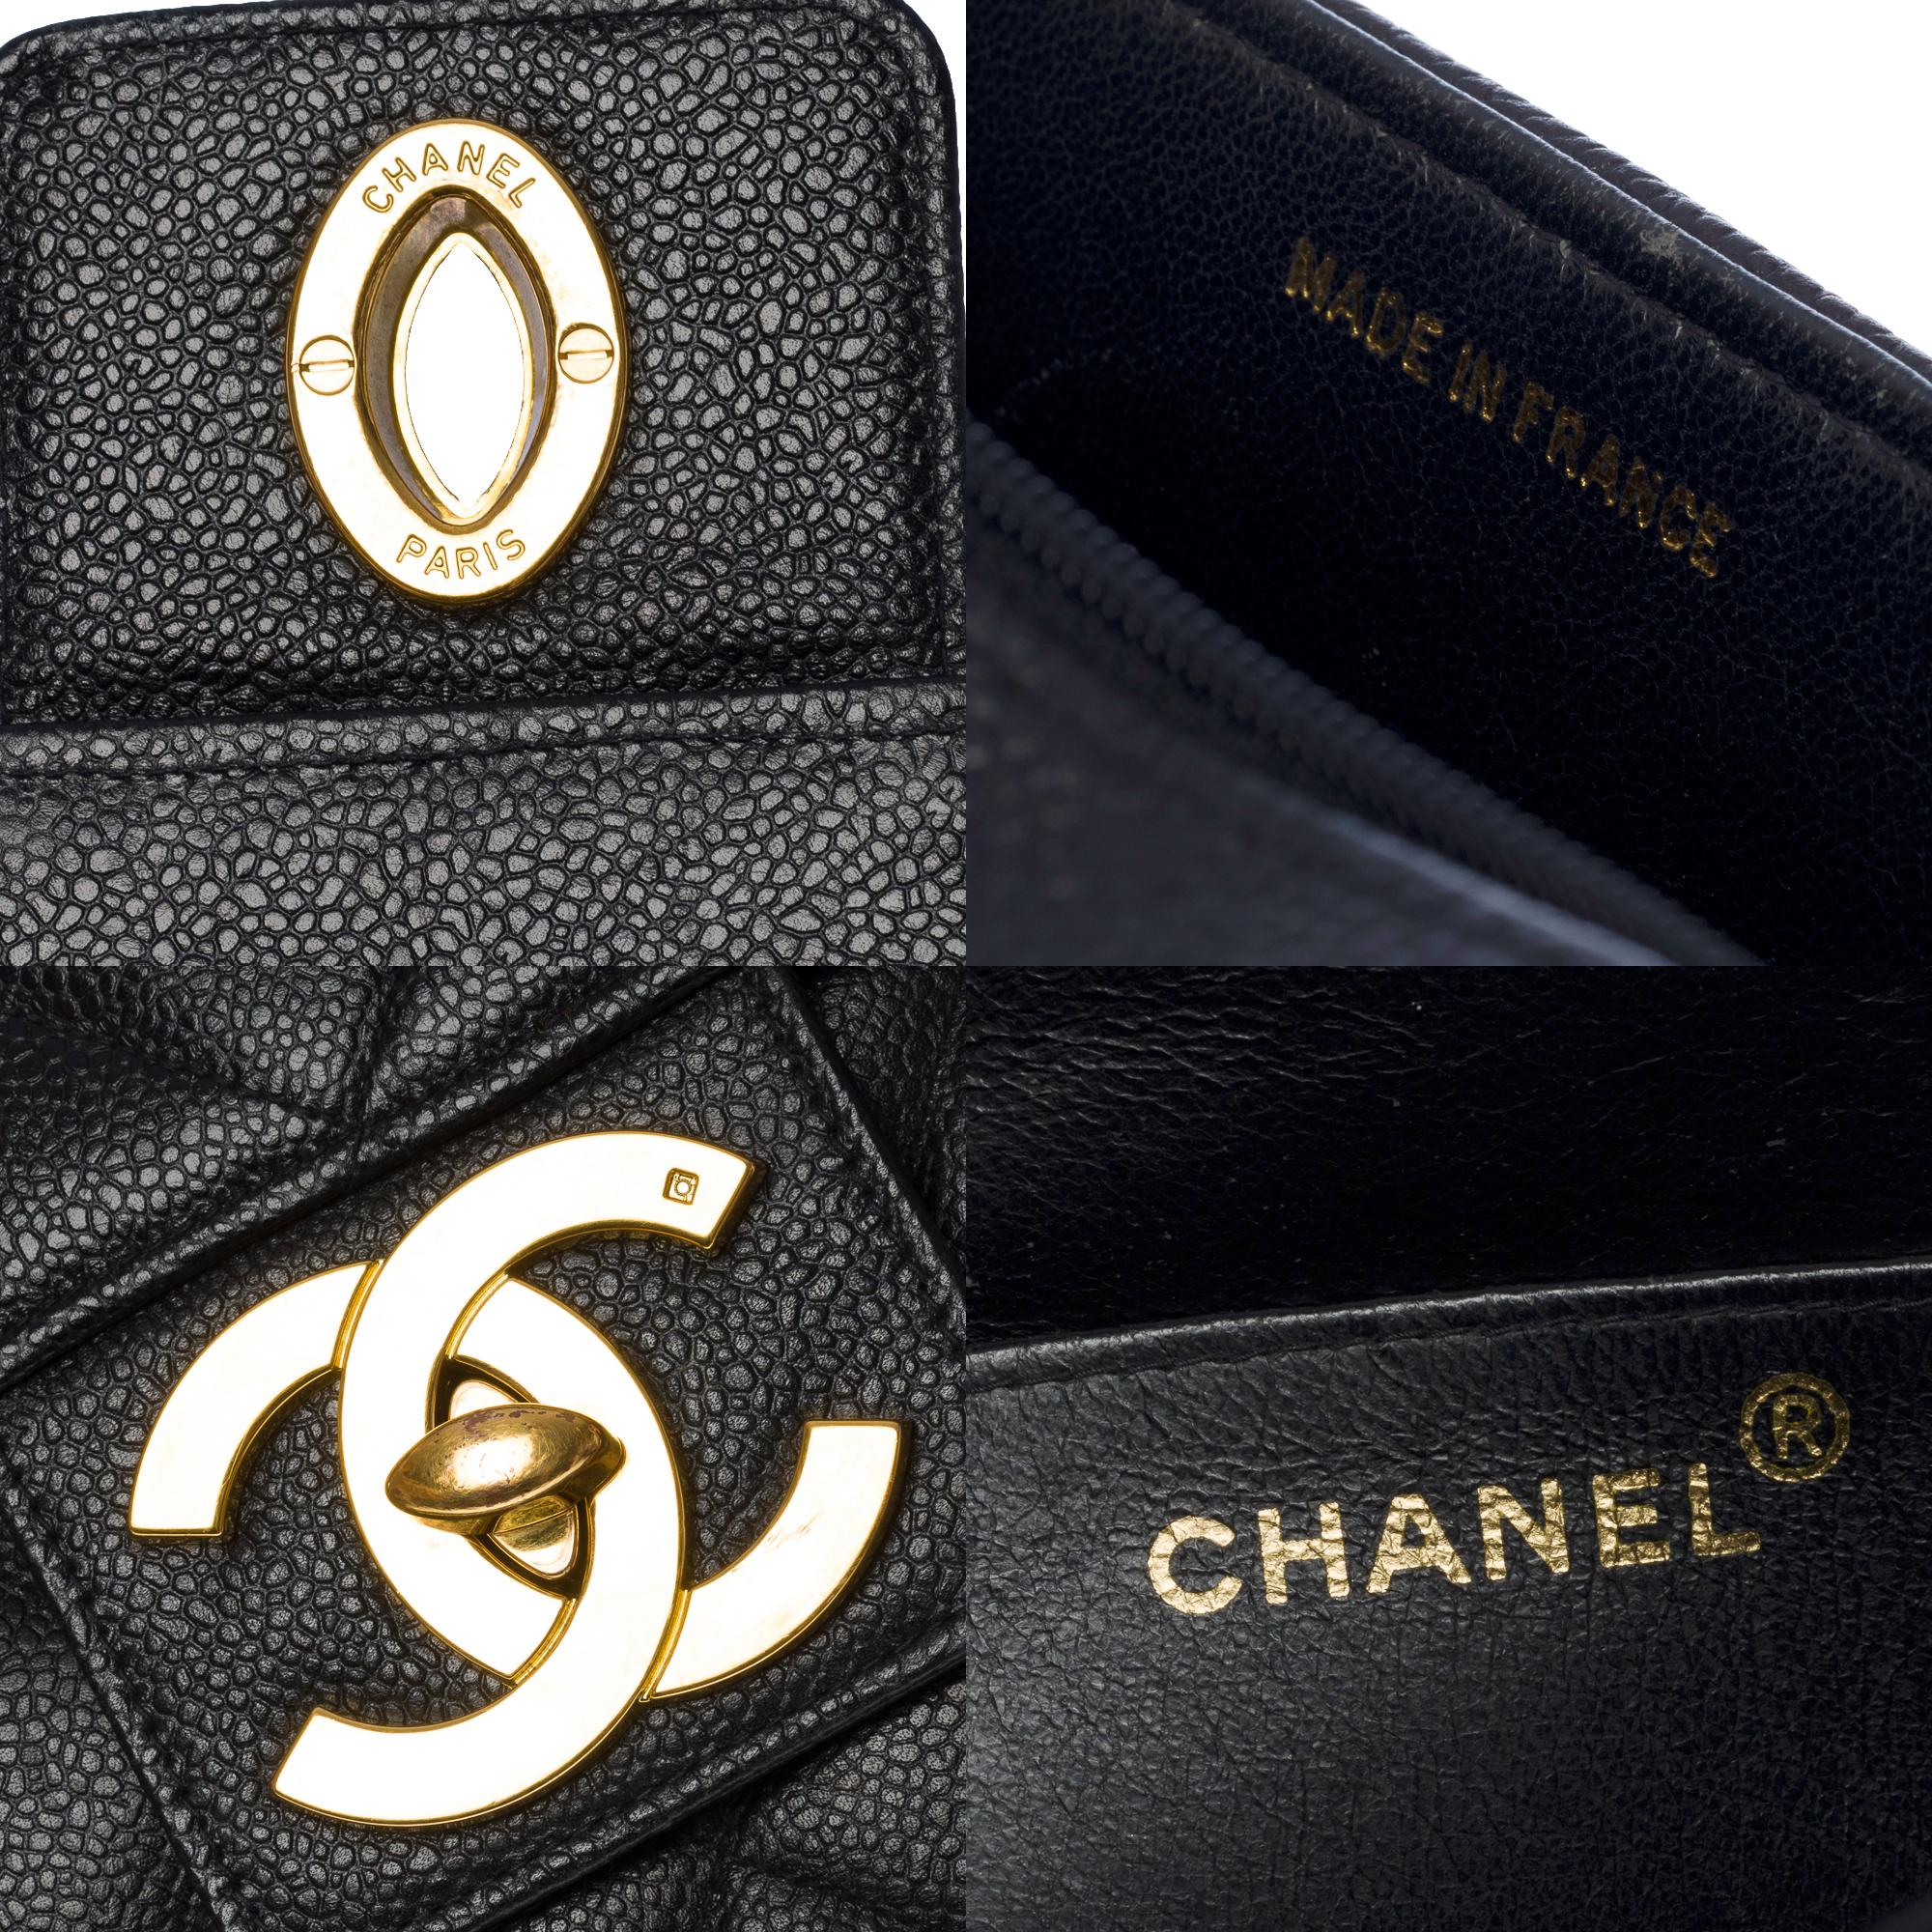 Women's or Men's Amazing Chanel vintage Briefcase in black caviar leather, GHW